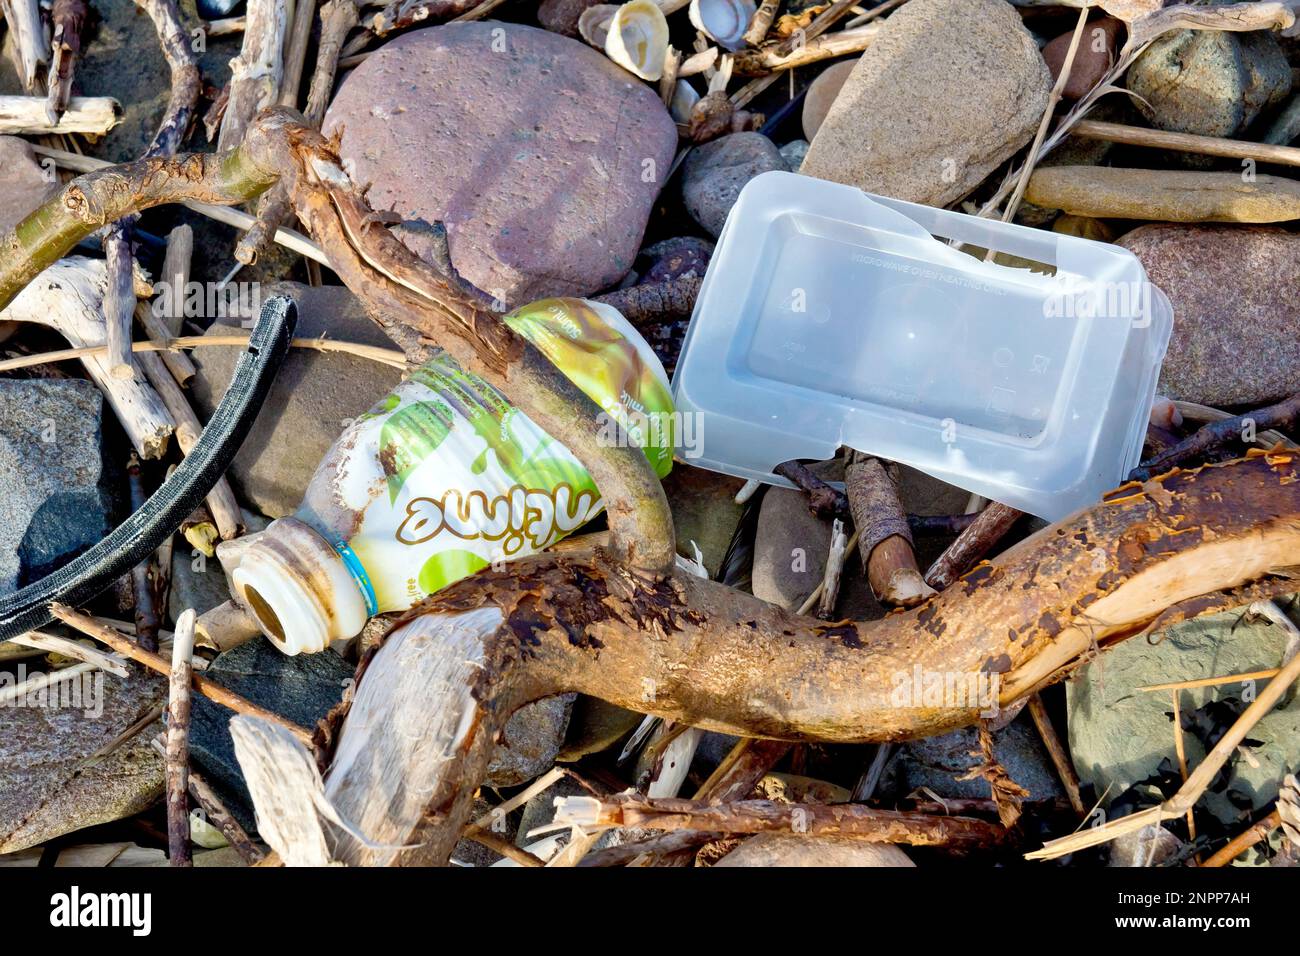 Close up of discarded single use plastic containers washed up on a pebble beach. Stock Photo